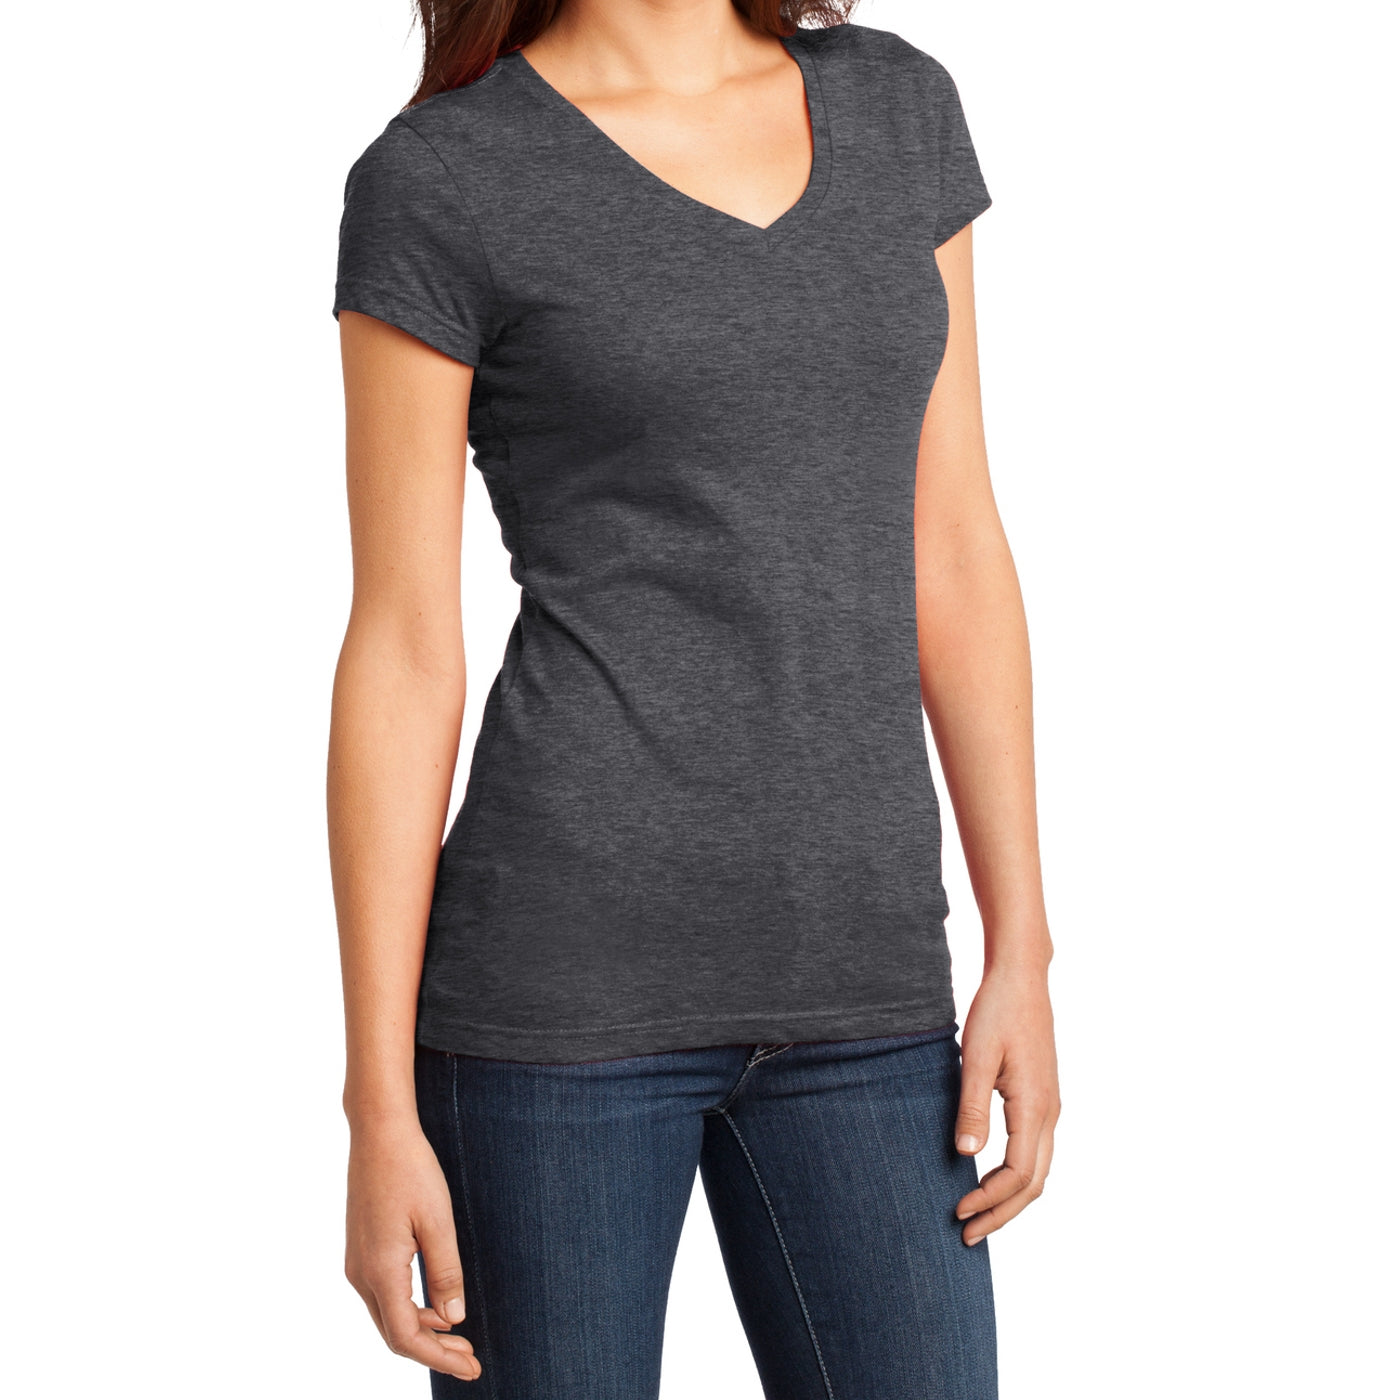 Women's Juniors Very Important Tee V-Neck - Heathered Charcoal